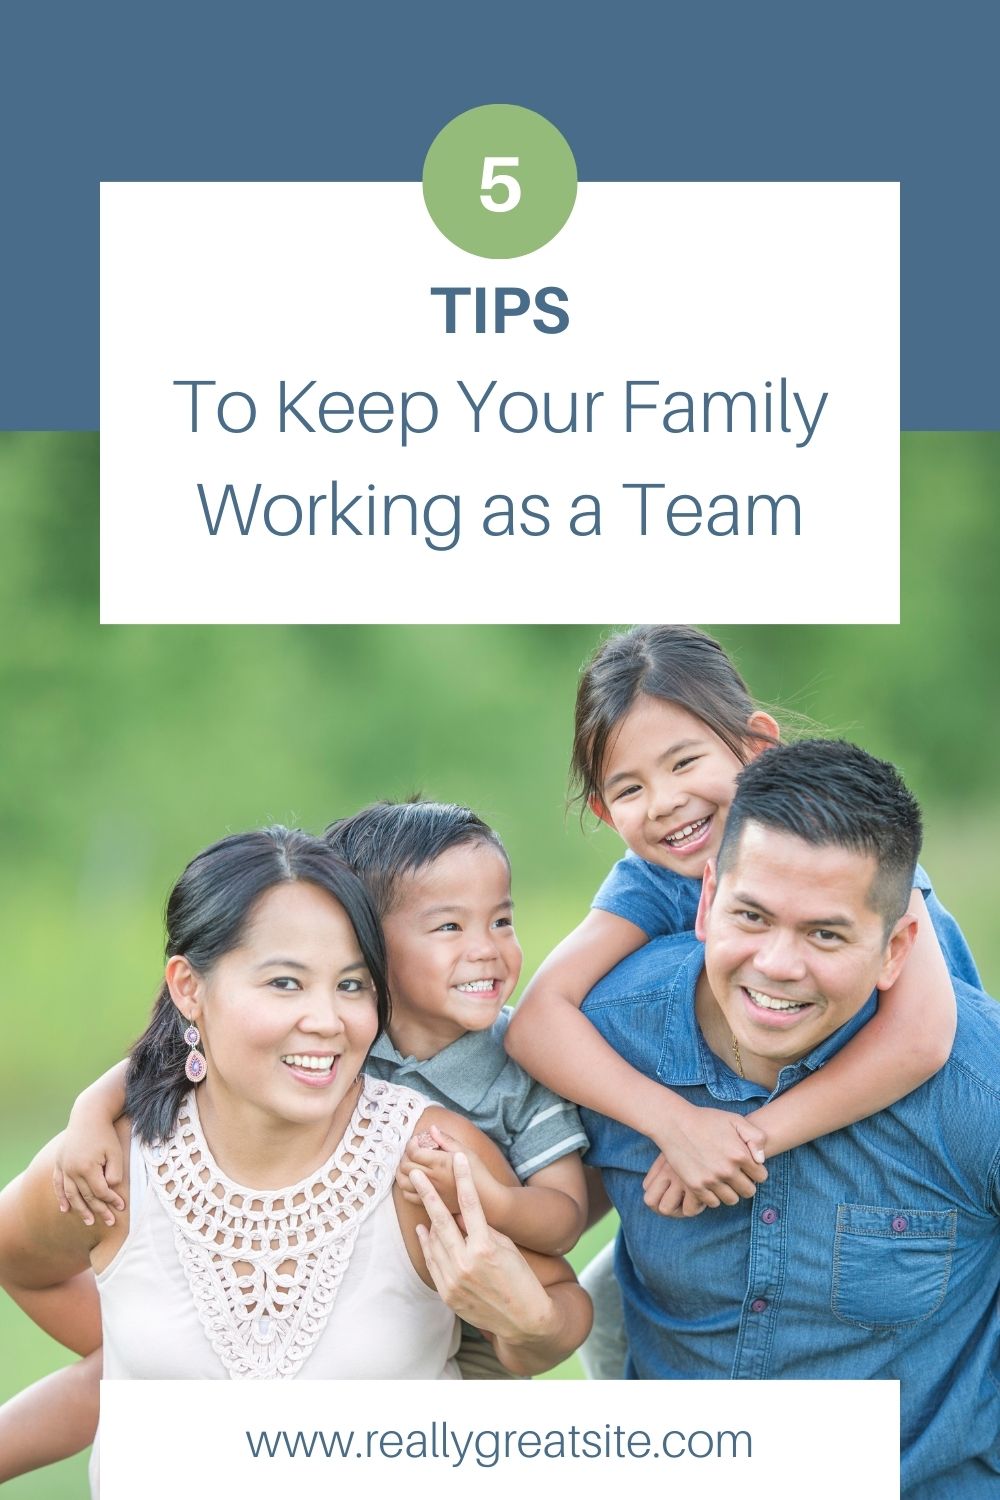 5 Tips to keep your family working together as a team